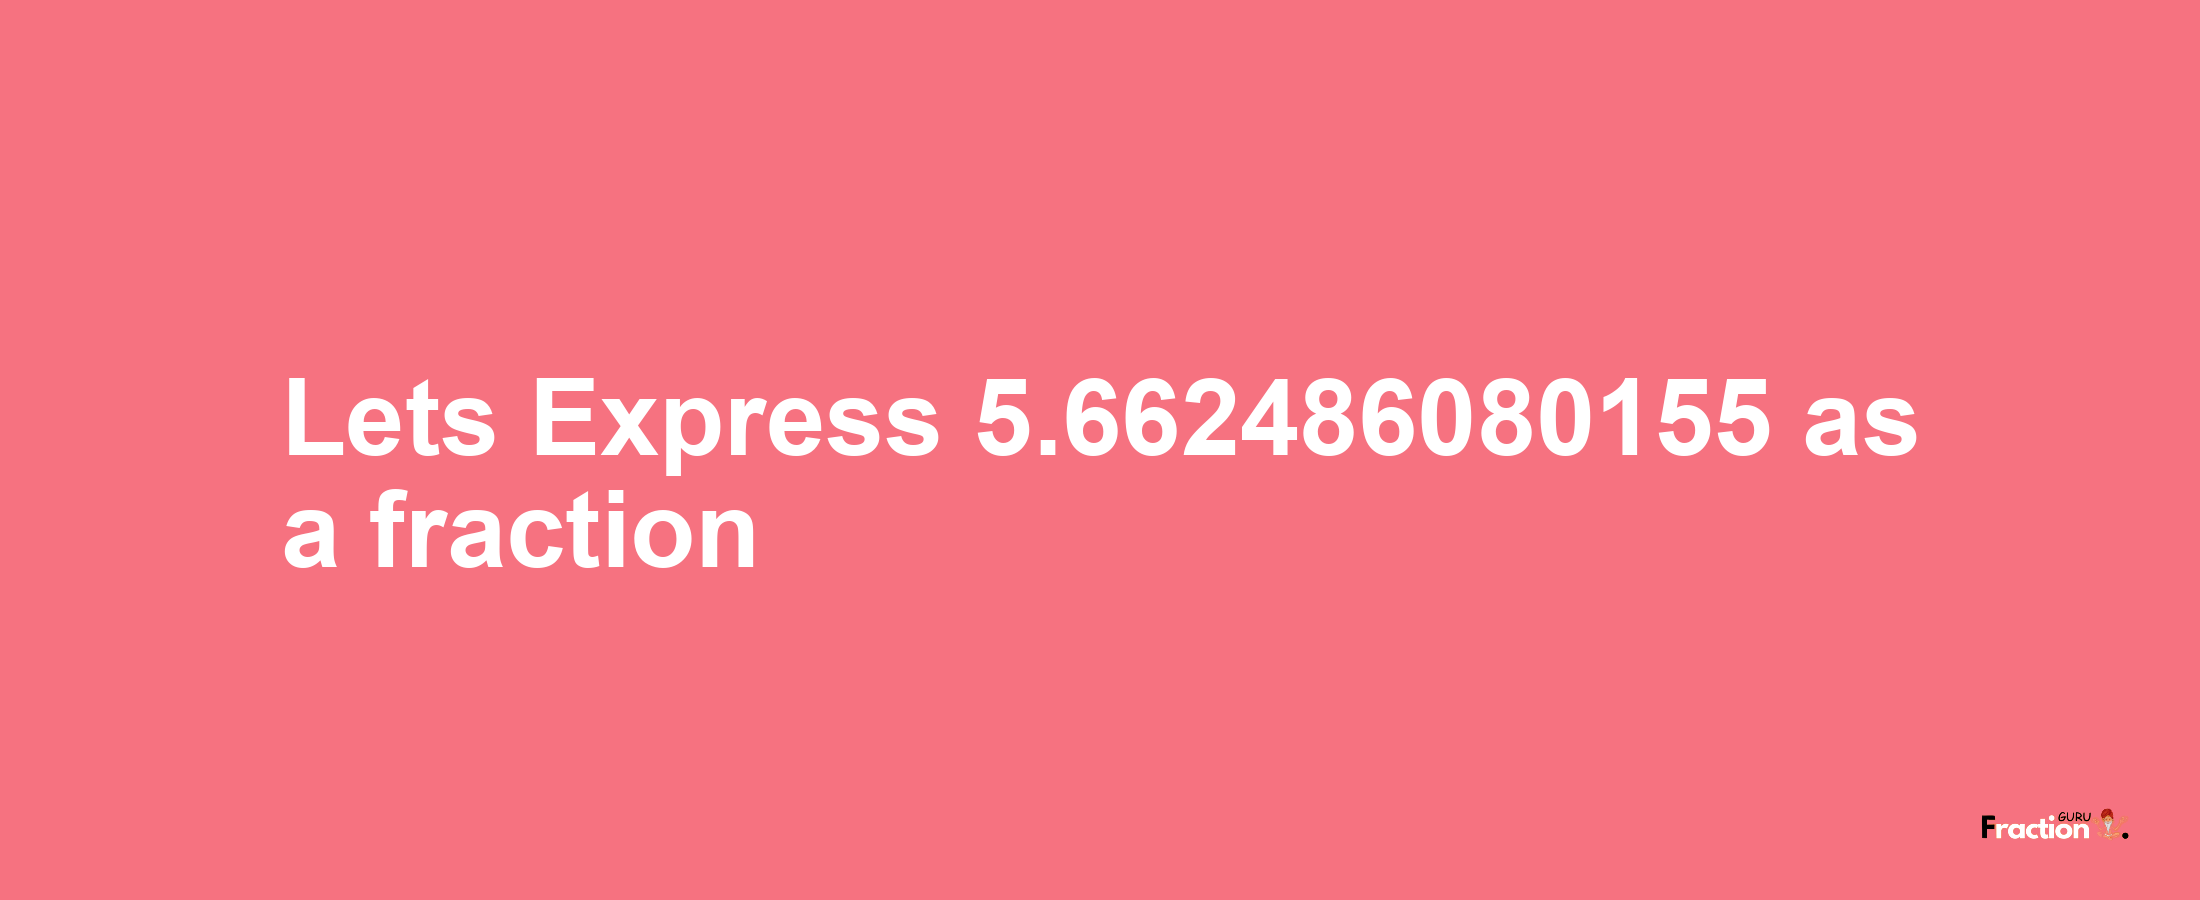 Lets Express 5.662486080155 as afraction